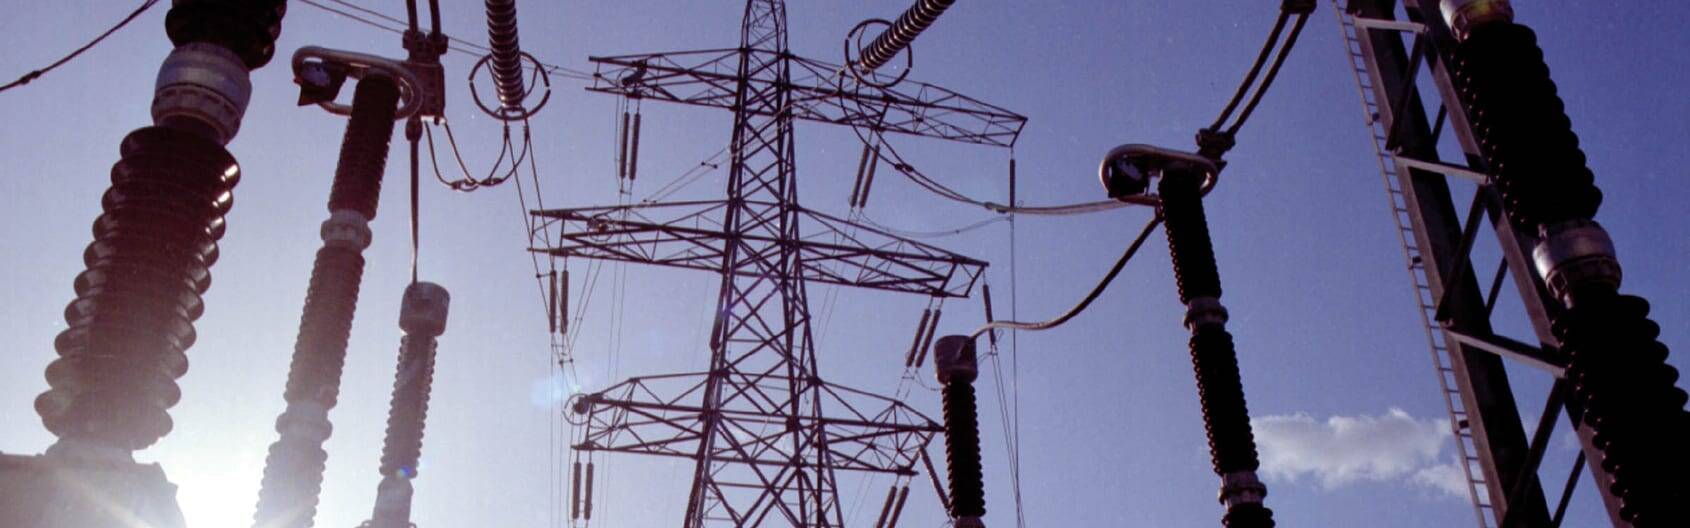 Helm says power cut underlines need to take National Grid ESO public